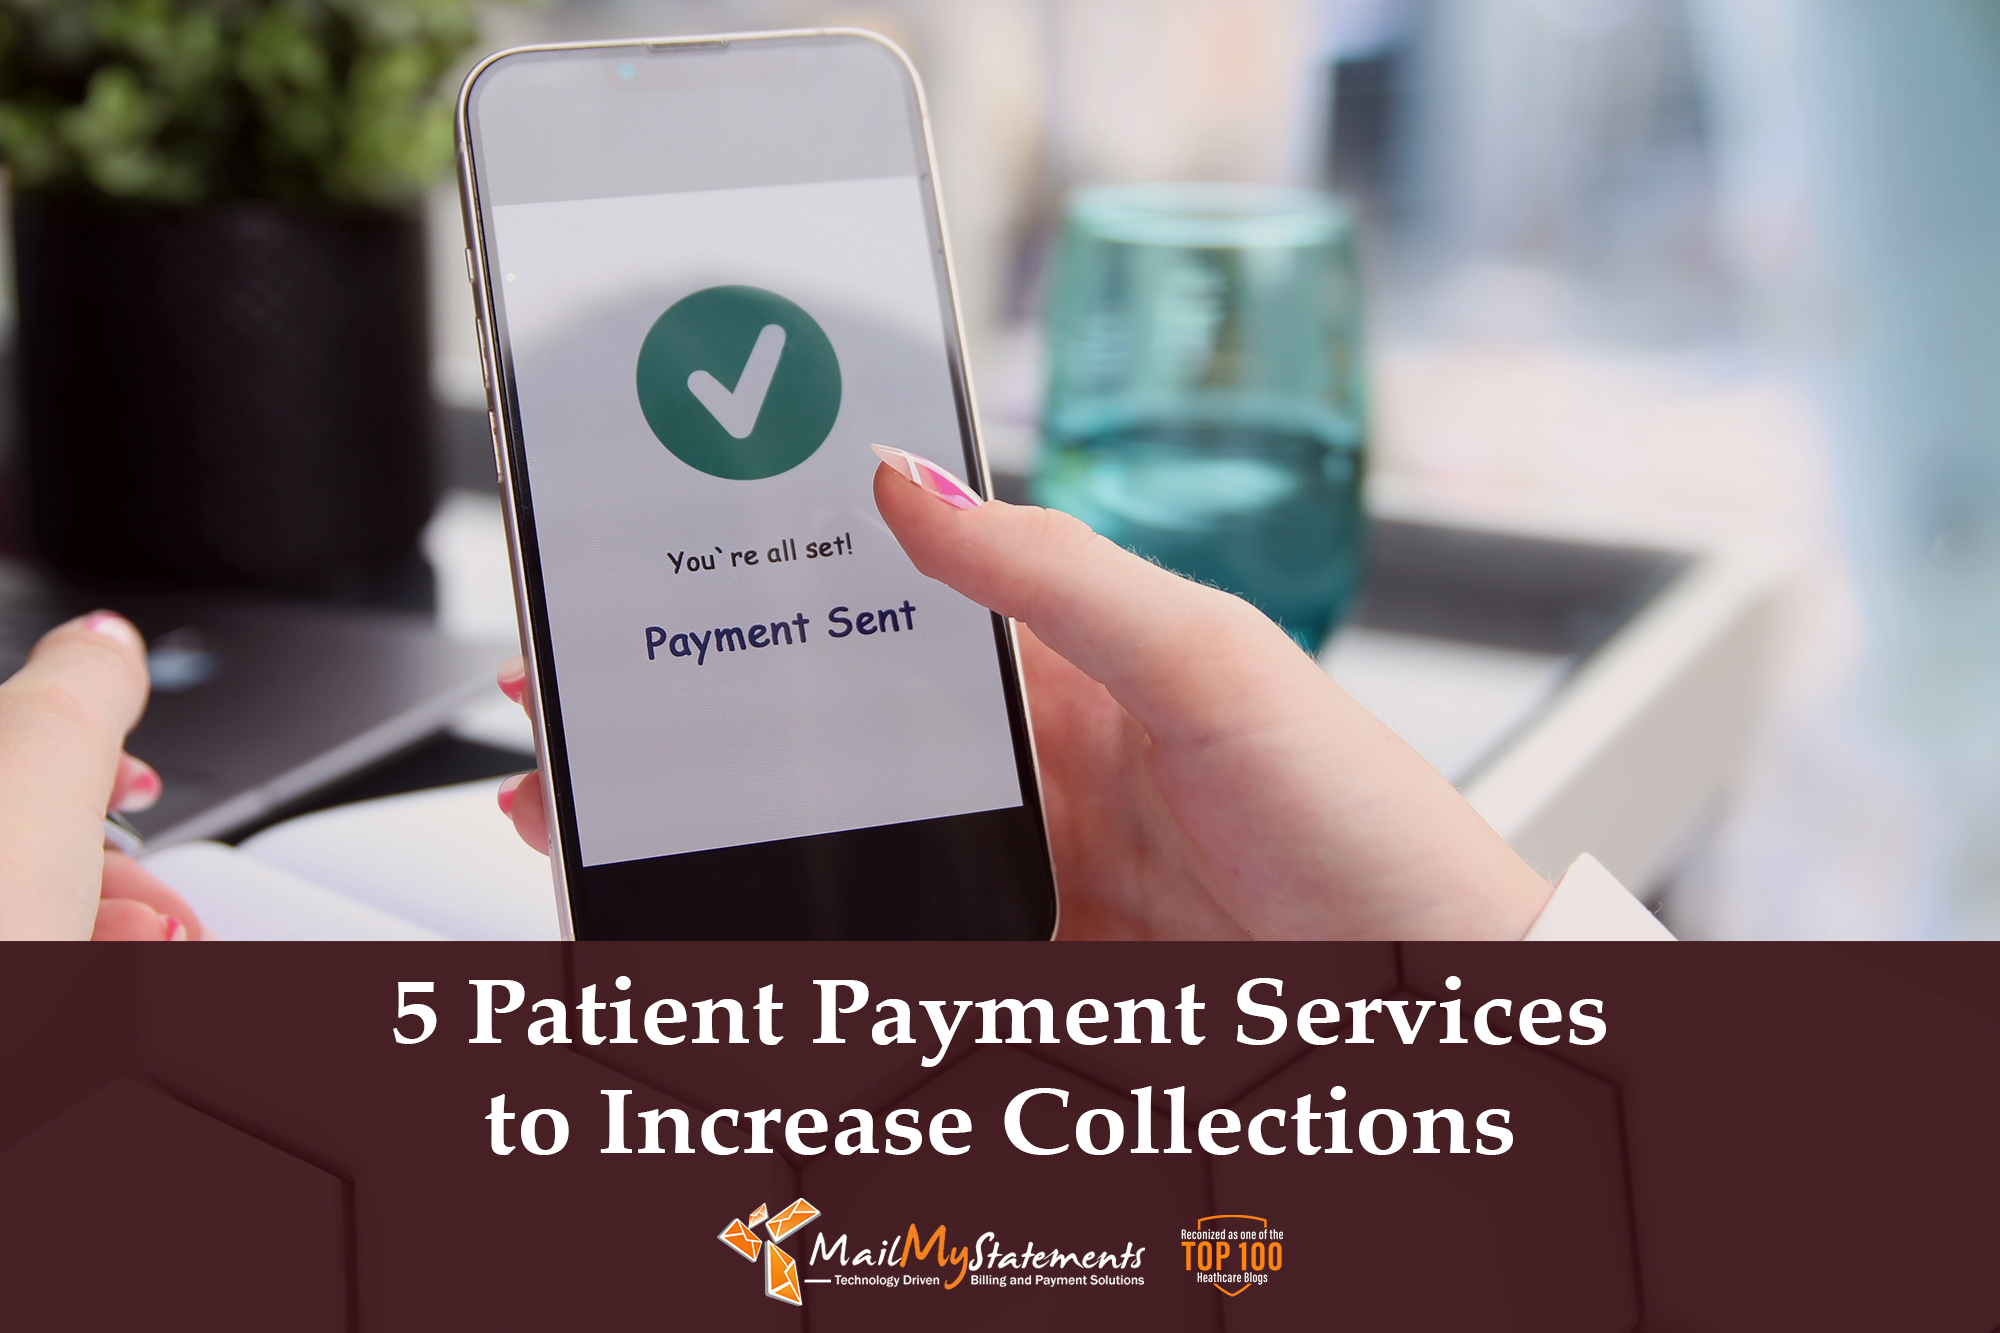 5 Patient Payment Services to Increase Collections